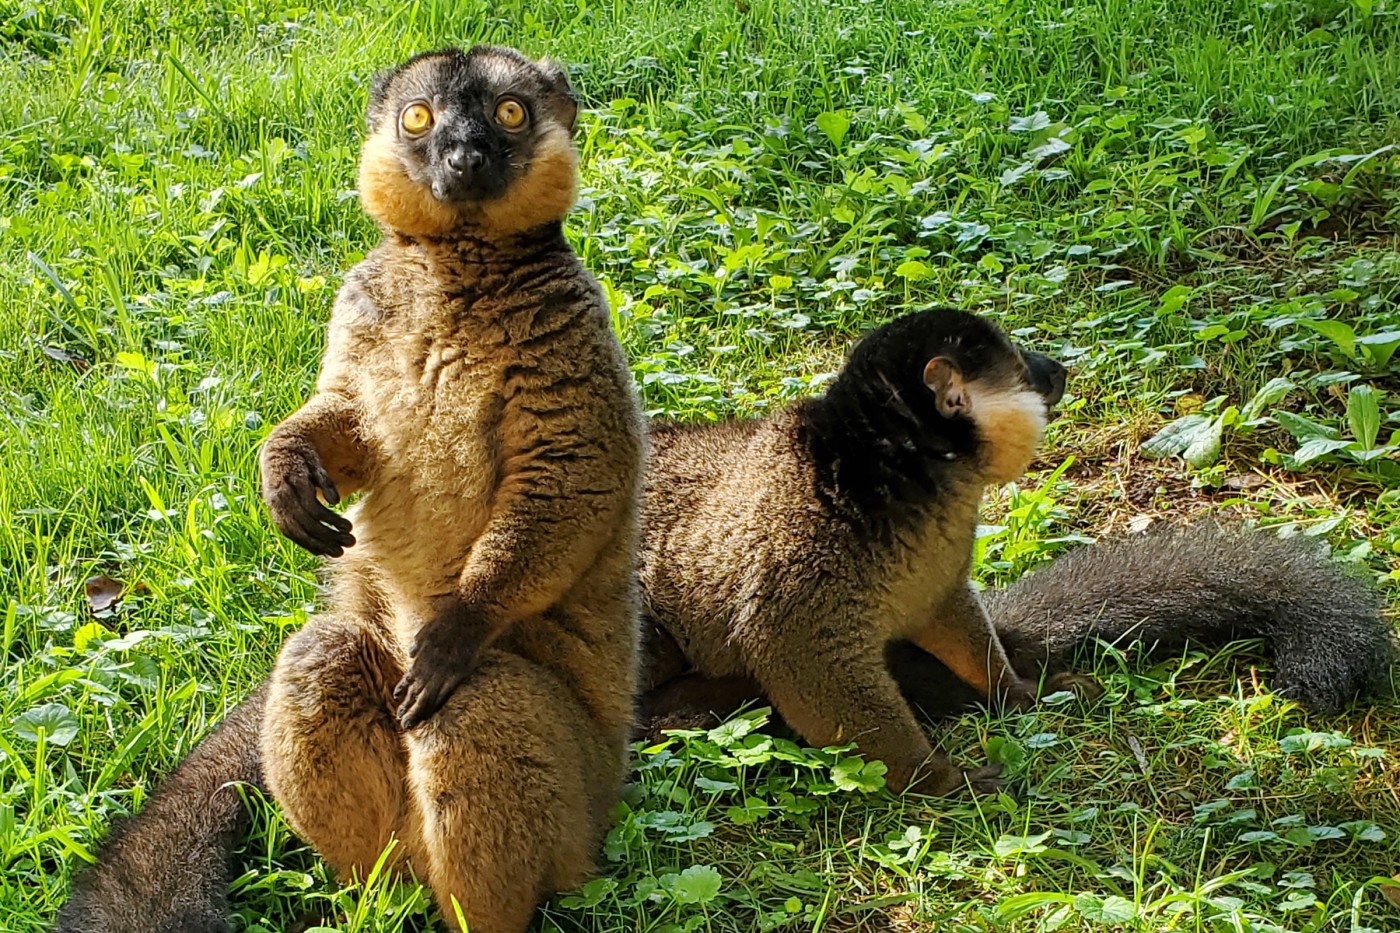 Brown-collared lemur brothers Beemer and Bentley sit next to each other in the grass.